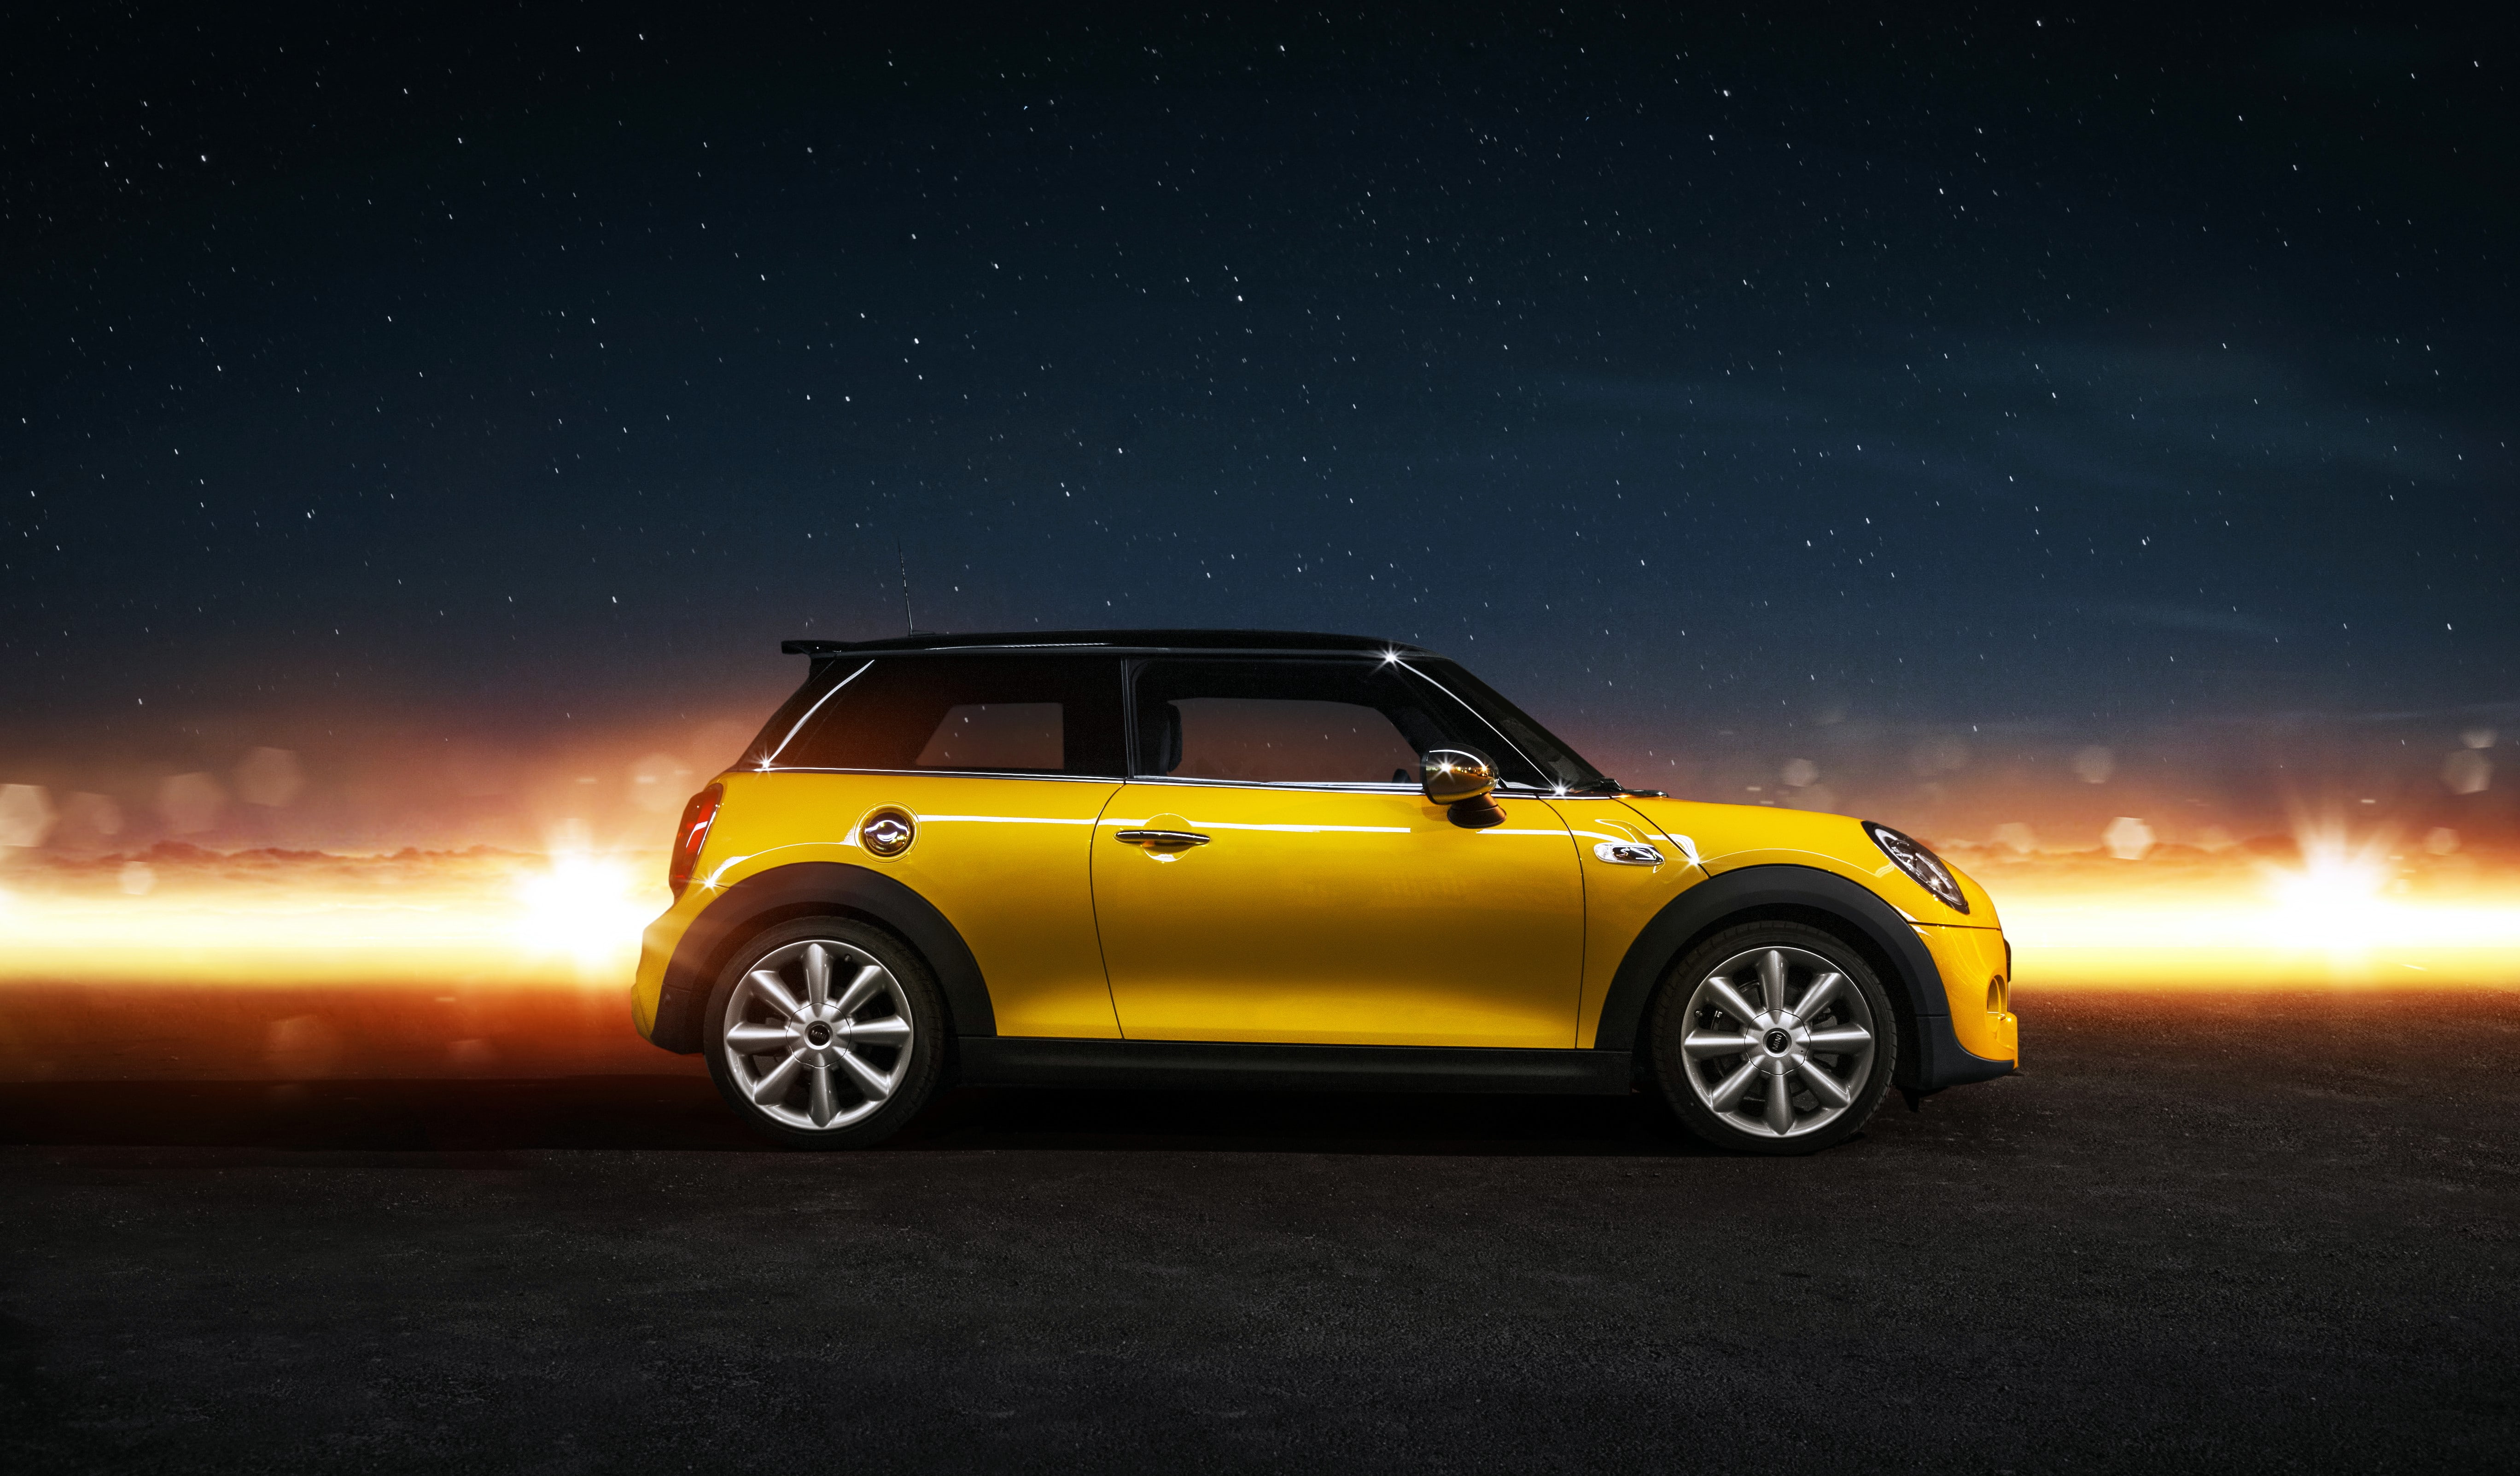 Mini cooper s, Side view, Car, night, mode of transportation